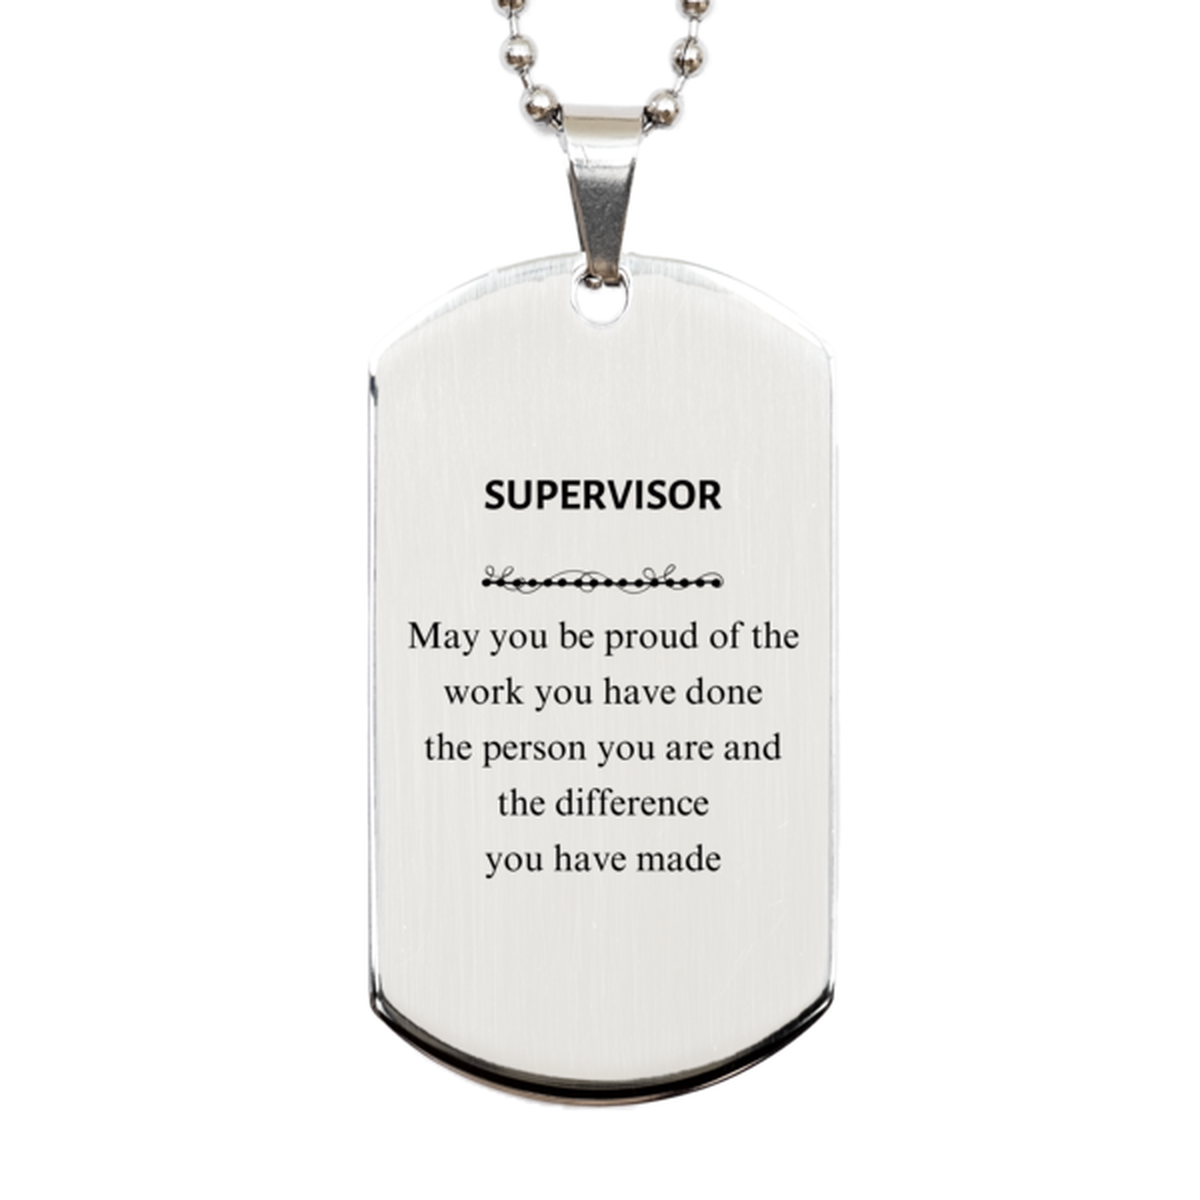 Supervisor May you be proud of the work you have done, Retirement Supervisor Silver Dog Tag for Colleague Appreciation Gifts Amazing for Supervisor